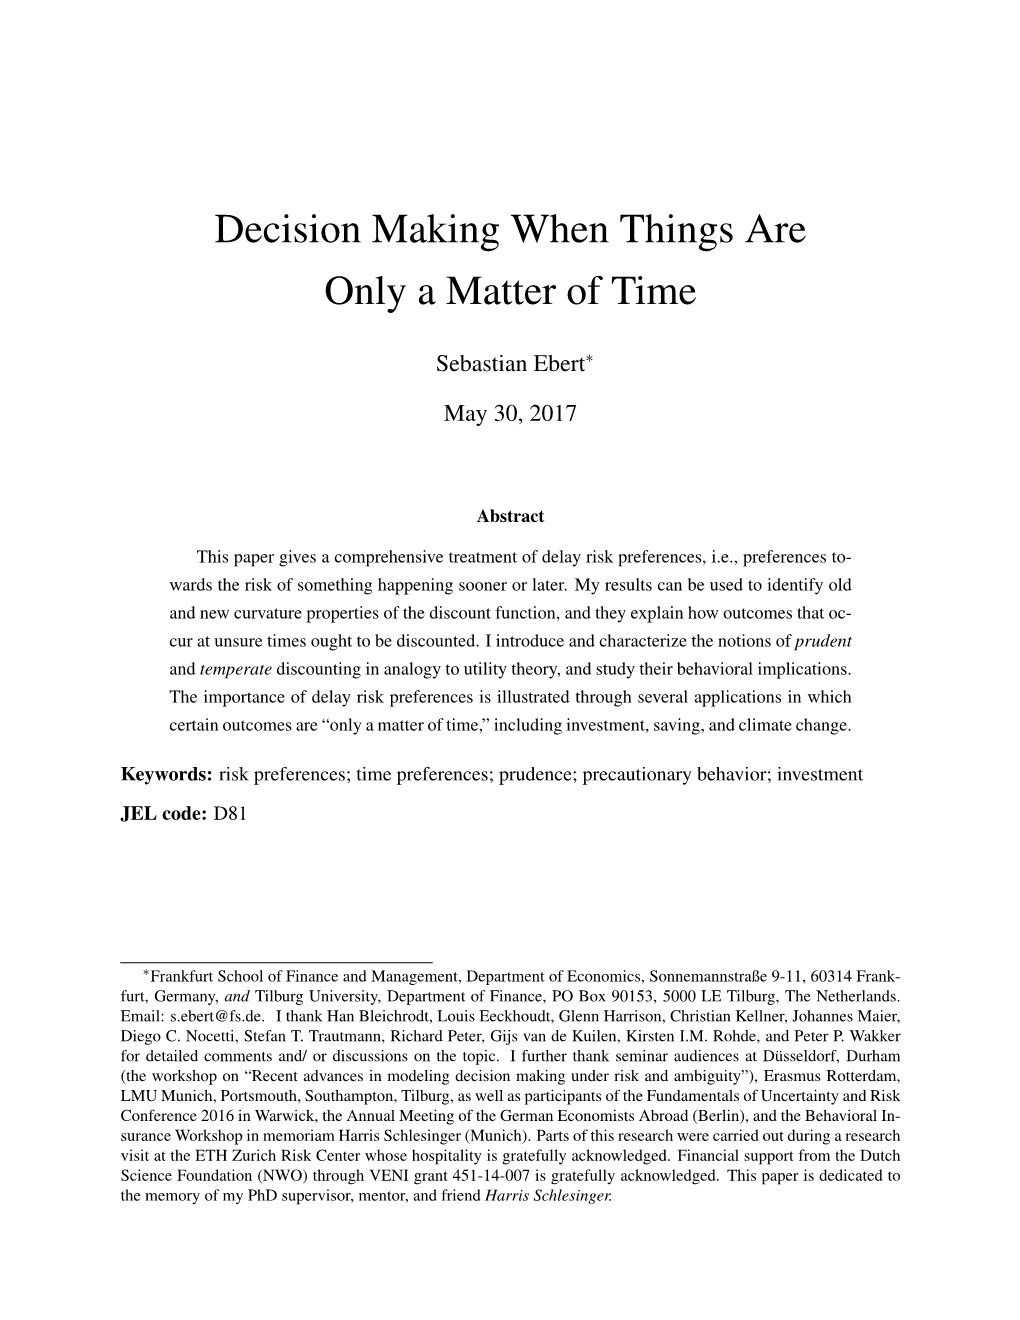 Decision Making When Things Are Only a Matter of Time